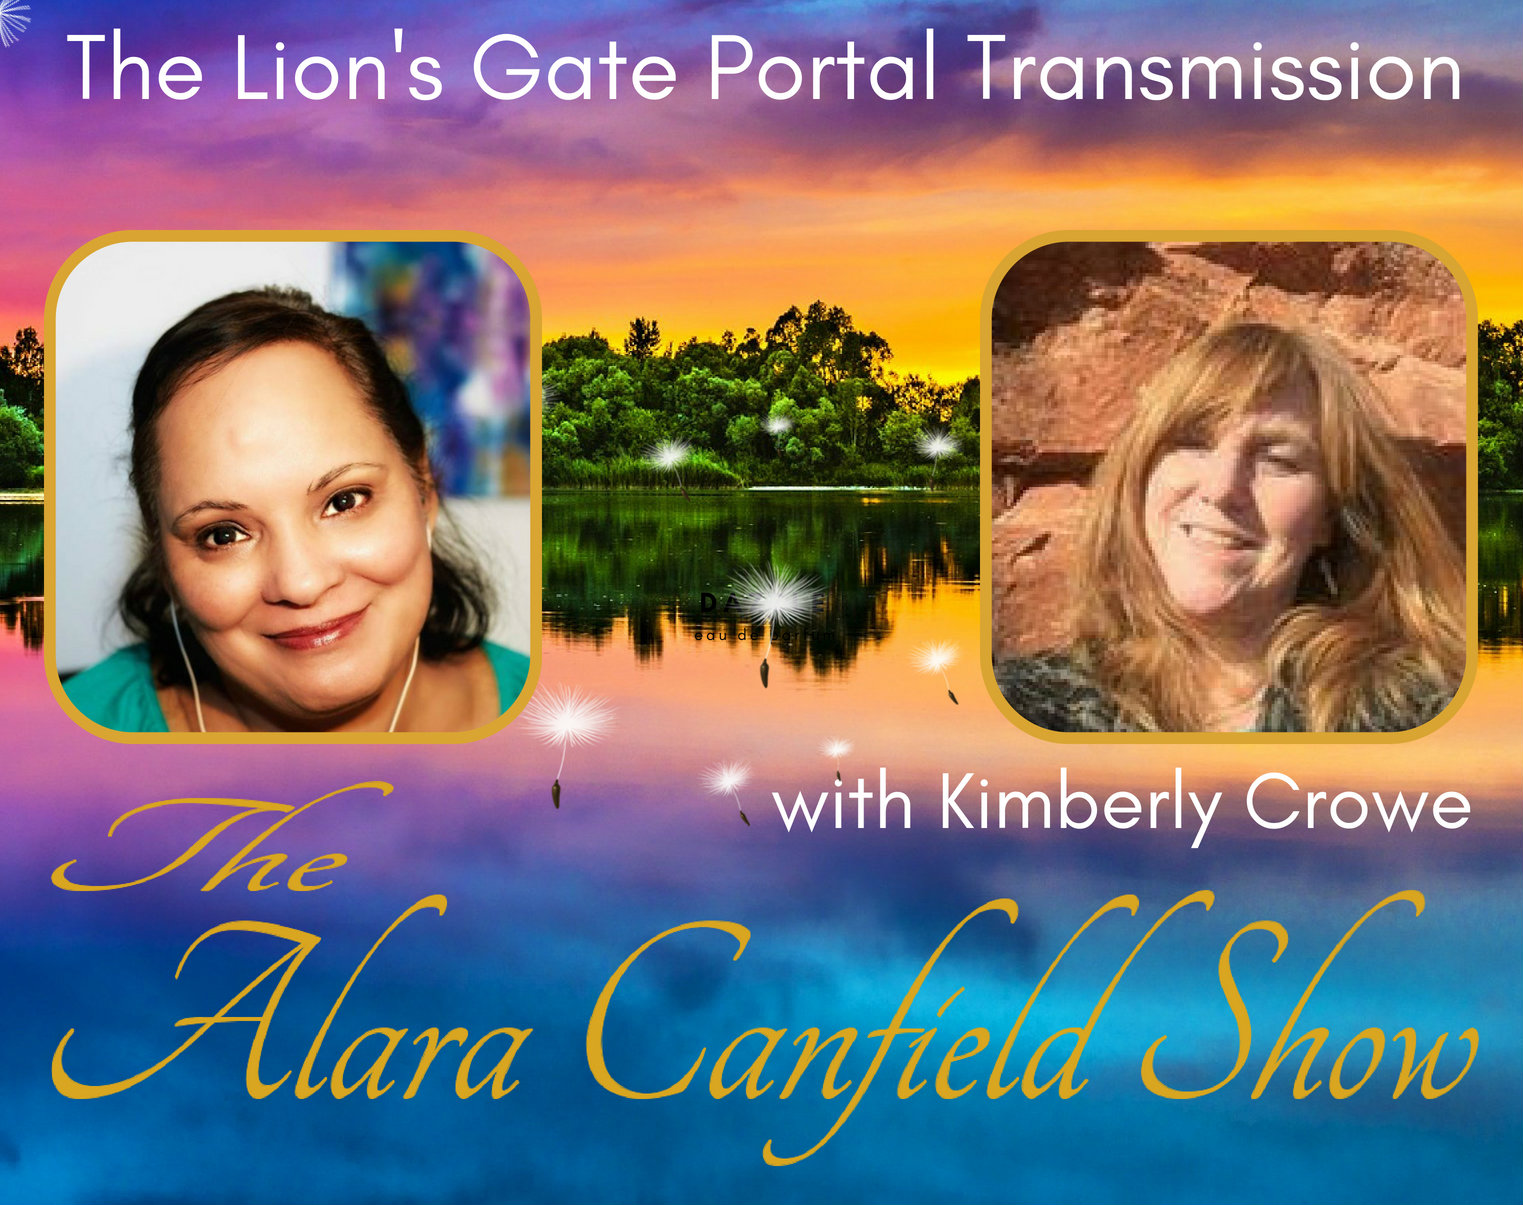 The Lion's Gate Portal Transmission with Kimberly Crowe